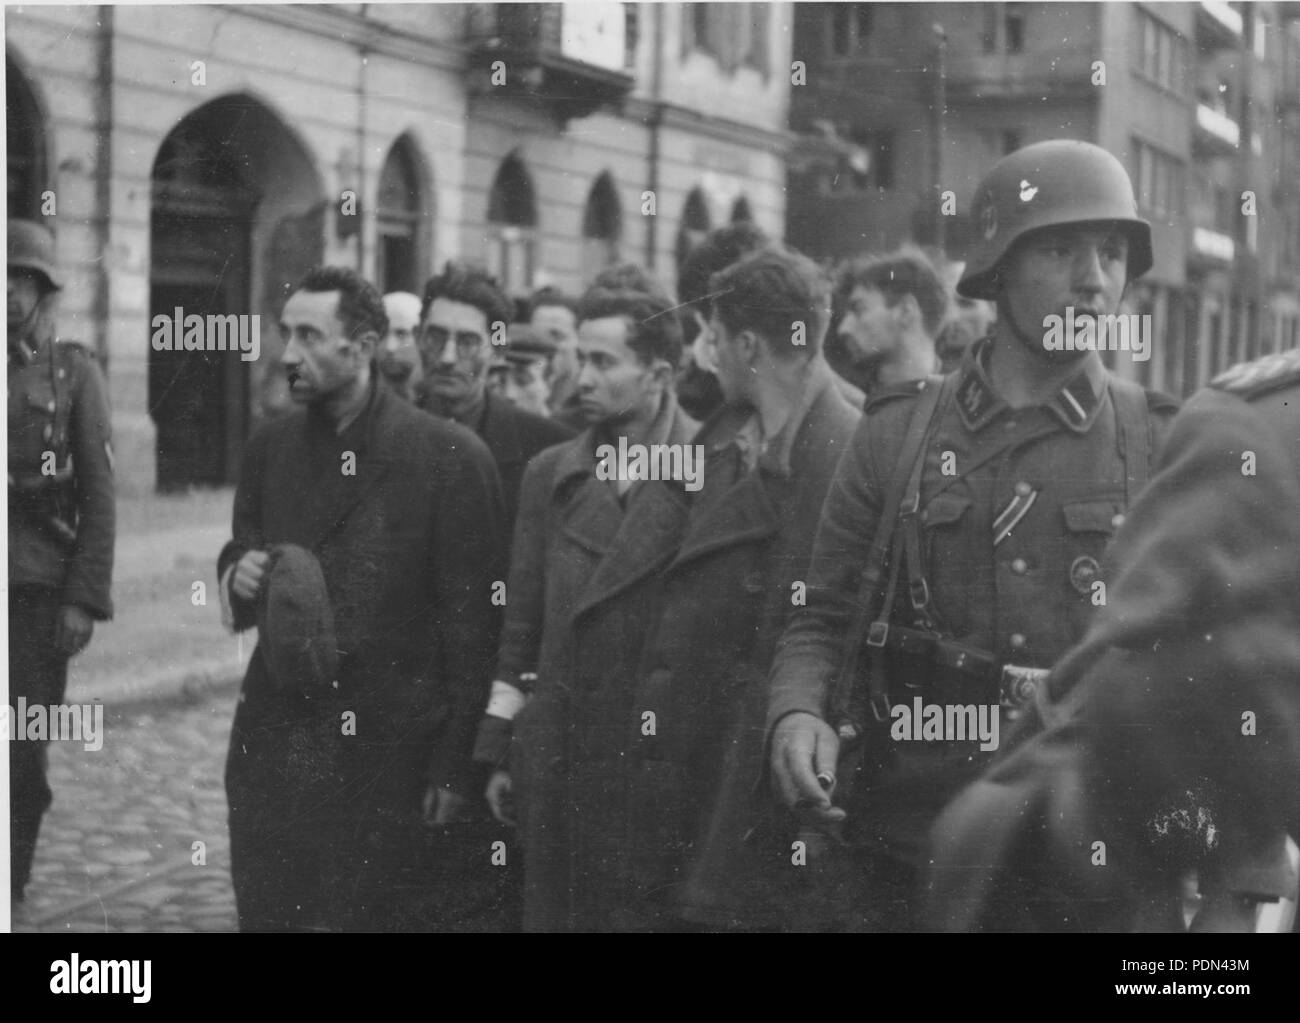 Stroop Report 2/4 Record Group 038 United States Counsel for the Prosecution of Axis Criminality; United States Exhibits, 1933-46 HMS Asset Id: HF1-88454435 ReDiscovery Number: 06315 347 Stroop Report - Warsaw Ghetto Uprising - NARA24 Stock Photo